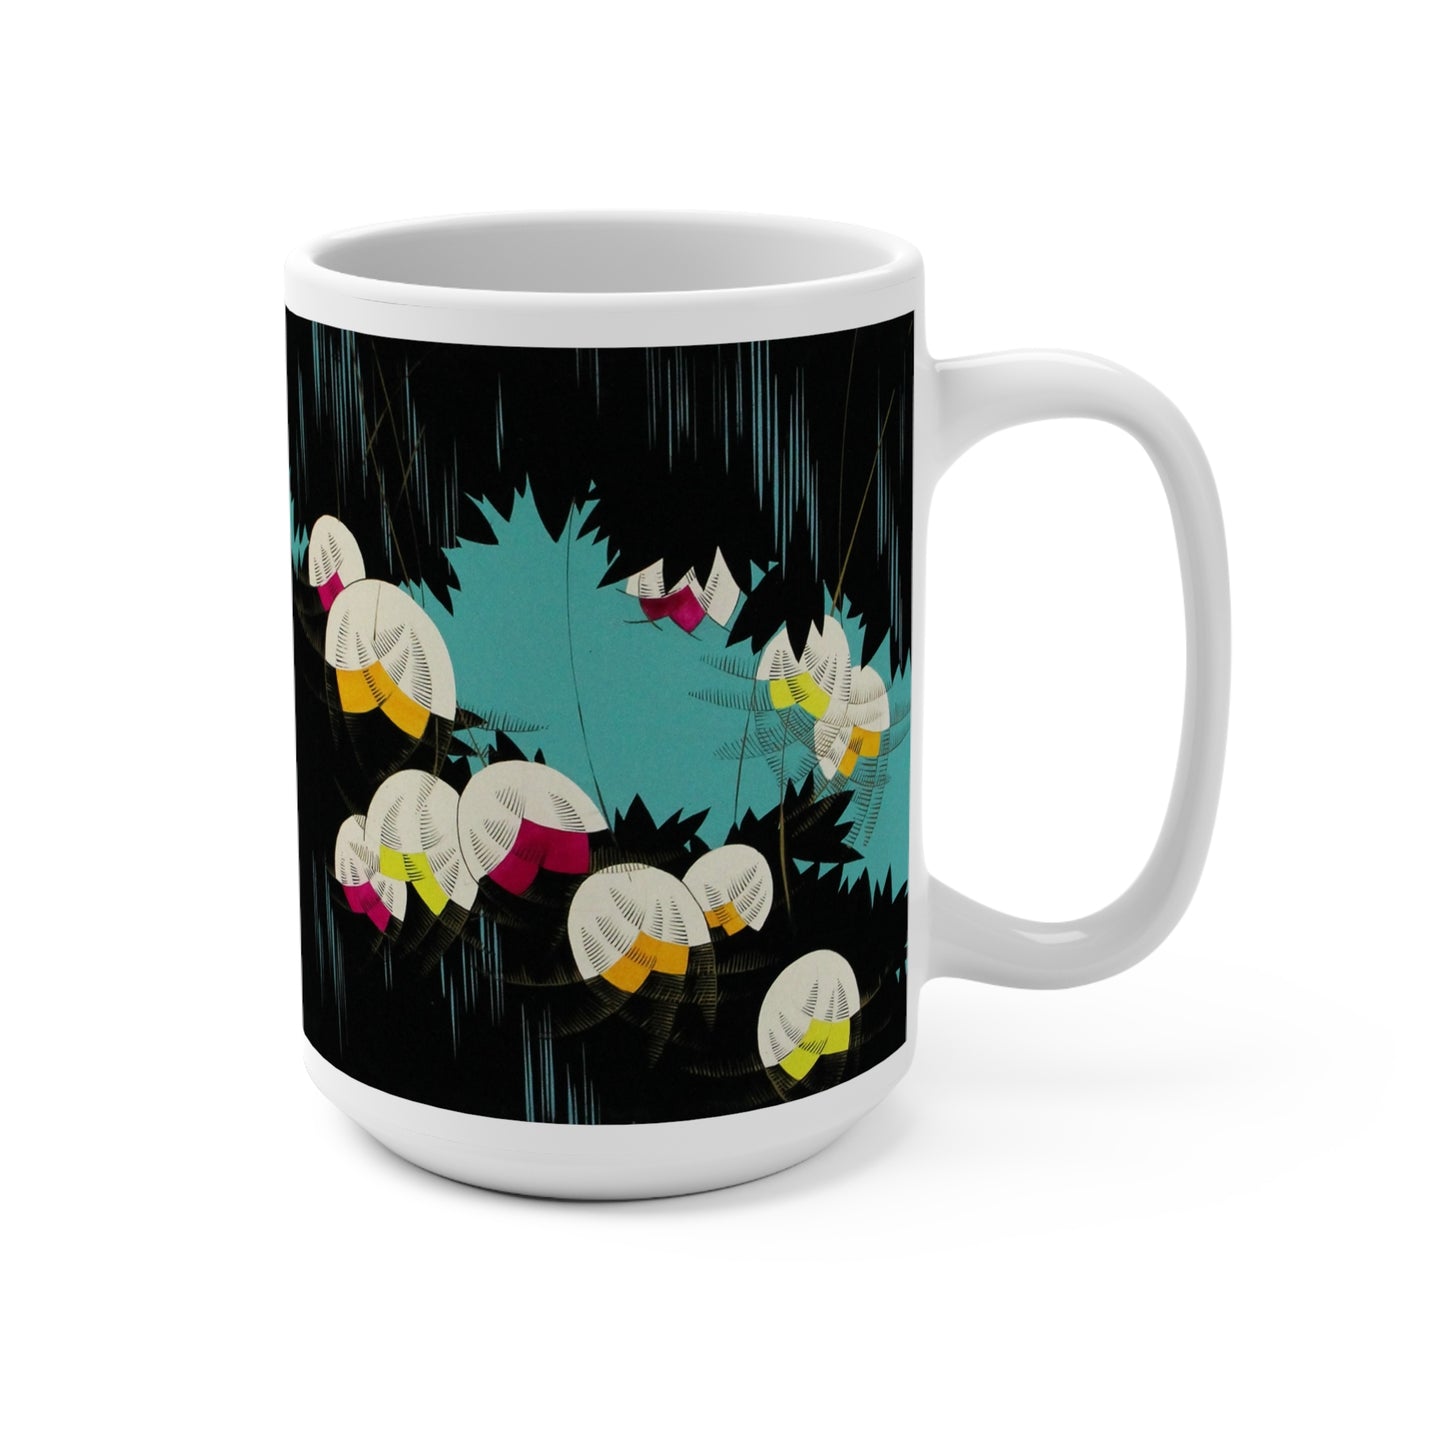 Abstract Floral Mug 15oz, Art Deco Flower Coffee Cup, Elegant Geometric Floral Design, Large Tea Cup, Gift for Flower Lover, Mother's Day